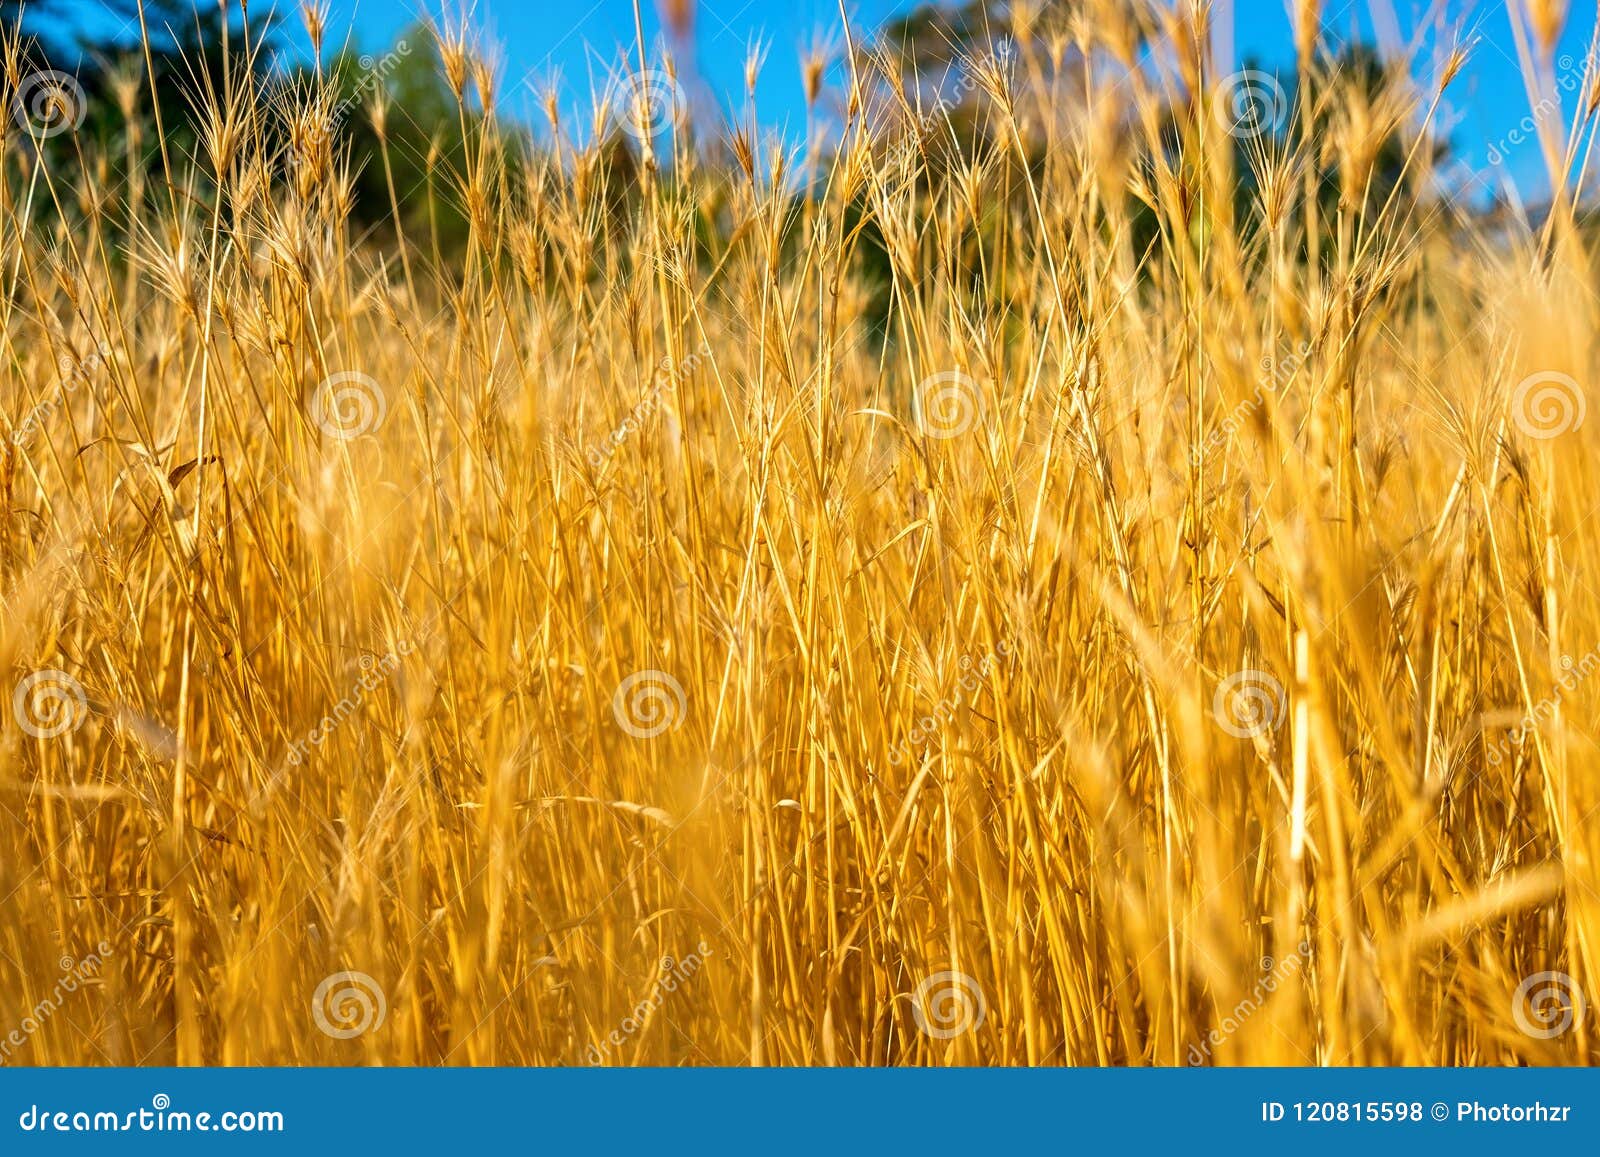 Yellow grass dry stock photo. Image of drought, countryside - 120815598